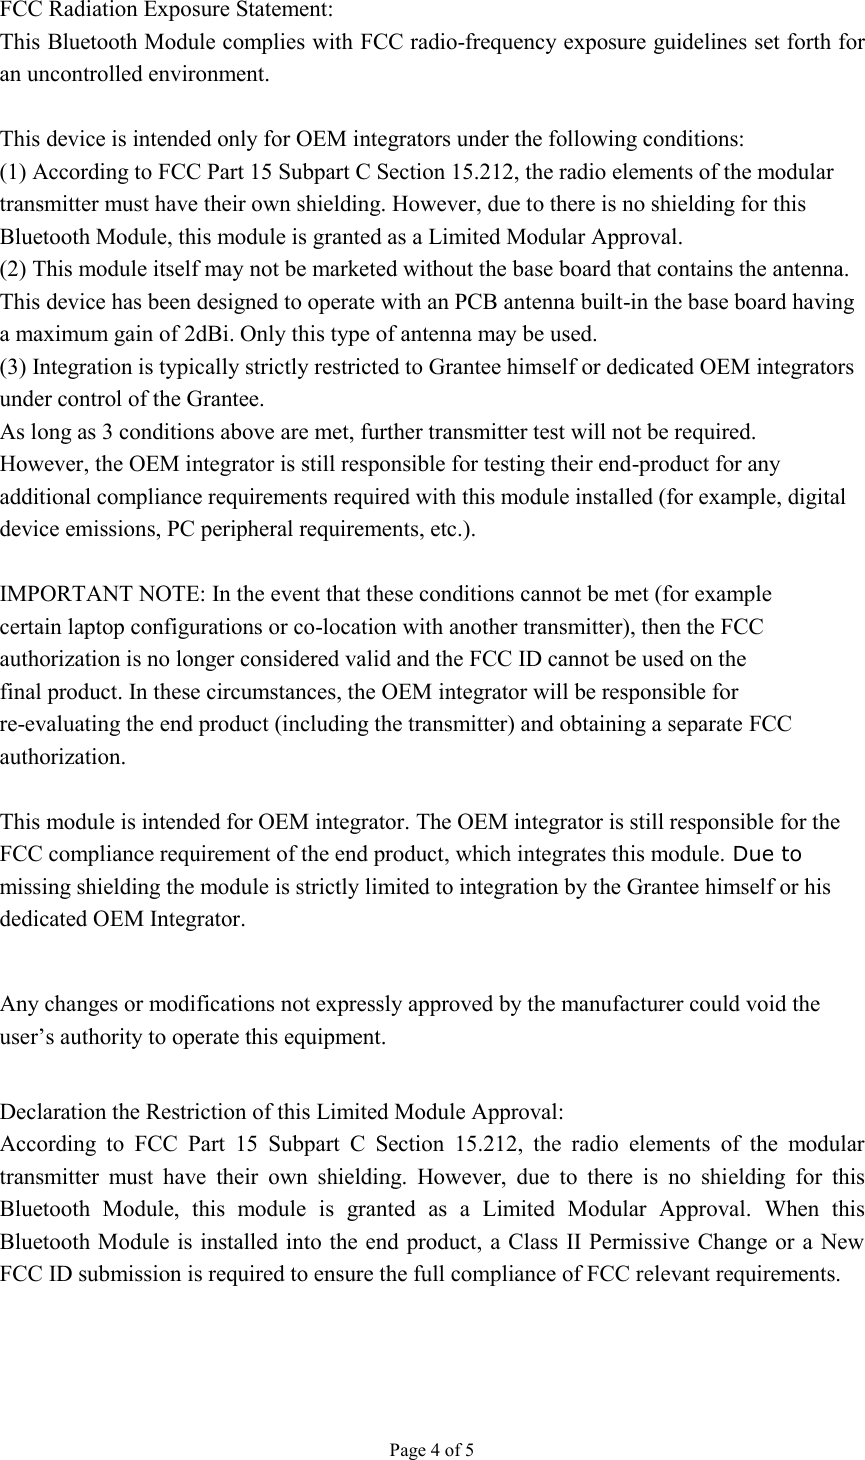 Page 4 of 5  FCC Radiation Exposure Statement: This Bluetooth Module complies with FCC radio-frequency exposure guidelines set forth for an uncontrolled environment.  This device is intended only for OEM integrators under the following conditions: (1) According to FCC Part 15 Subpart C Section 15.212, the radio elements of the modular transmitter must have their own shielding. However, due to there is no shielding for this Bluetooth Module, this module is granted as a Limited Modular Approval. (2) This module itself may not be marketed without the base board that contains the antenna. This device has been designed to operate with an PCB antenna built-in the base board having a maximum gain of 2dBi. Only this type of antenna may be used. (3) Integration is typically strictly restricted to Grantee himself or dedicated OEM integrators under control of the Grantee. As long as 3 conditions above are met, further transmitter test will not be required. However, the OEM integrator is still responsible for testing their end-product for any additional compliance requirements required with this module installed (for example, digital device emissions, PC peripheral requirements, etc.).  IMPORTANT NOTE: In the event that these conditions cannot be met (for example certain laptop configurations or co-location with another transmitter), then the FCC authorization is no longer considered valid and the FCC ID cannot be used on the final product. In these circumstances, the OEM integrator will be responsible for re-evaluating the end product (including the transmitter) and obtaining a separate FCC authorization.  This module is intended for OEM integrator. The OEM integrator is still responsible for the FCC compliance requirement of the end product, which integrates this module. Due to missing shielding the module is strictly limited to integration by the Grantee himself or his dedicated OEM Integrator.  Any changes or modifications not expressly approved by the manufacturer could void the user’s authority to operate this equipment.  Declaration the Restriction of this Limited Module Approval: According  to  FCC  Part  15  Subpart  C  Section  15.212,  the  radio  elements  of  the  modular transmitter  must  have  their  own  shielding.  However,  due  to  there  is  no  shielding  for  this Bluetooth  Module,  this  module  is  granted  as  a  Limited  Modular  Approval.  When  this Bluetooth Module is installed into the end  product, a Class II Permissive Change or a New FCC ID submission is required to ensure the full compliance of FCC relevant requirements. 